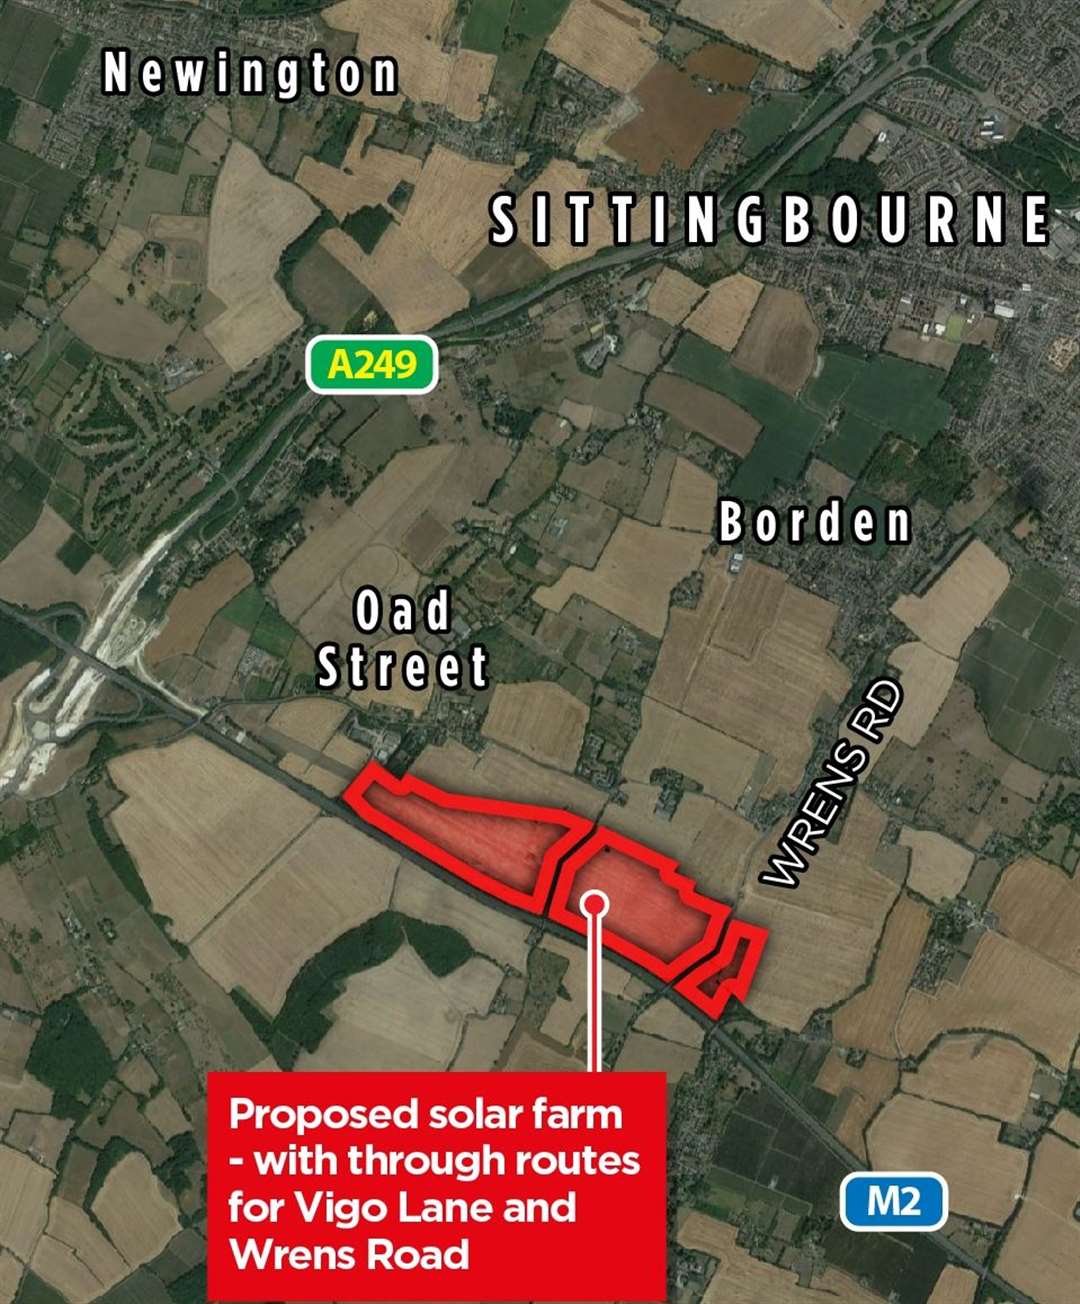 The solar farm would be between Oad Street and the M2 near Junction 5 for Sittingbourne